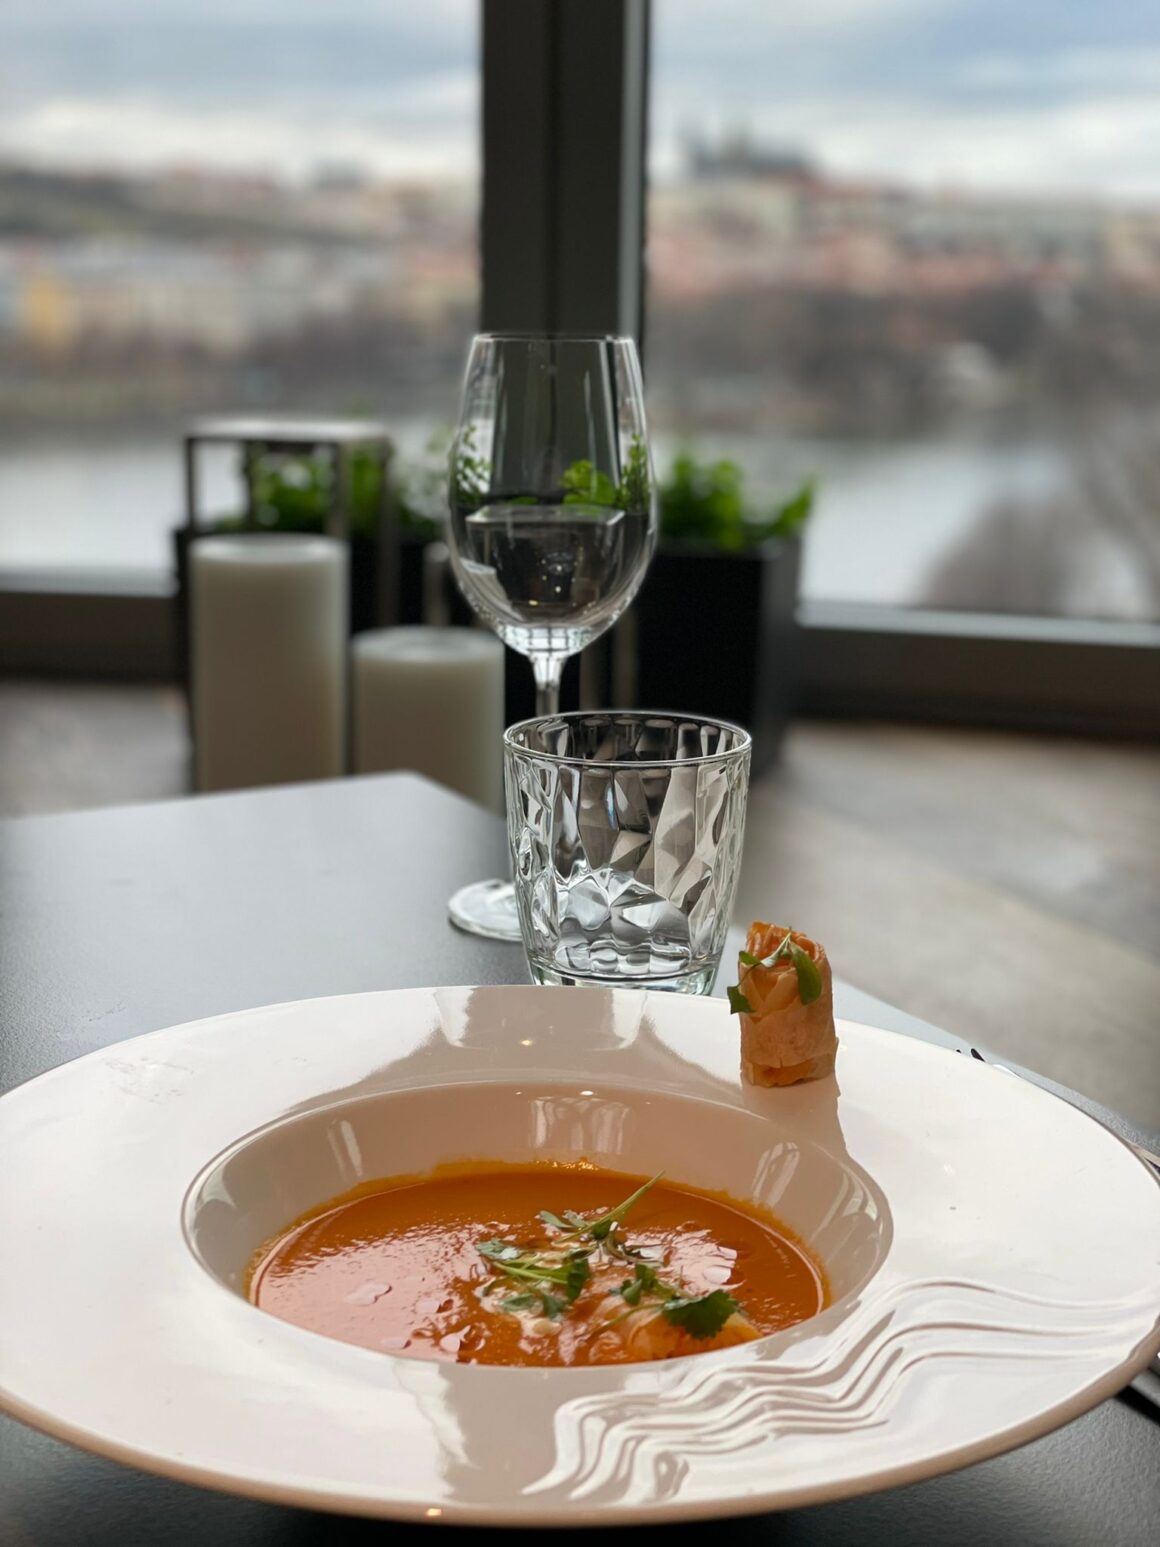 A dinner meal at Ginger & Fred, a restaurant at the top of Dancing House in Prague